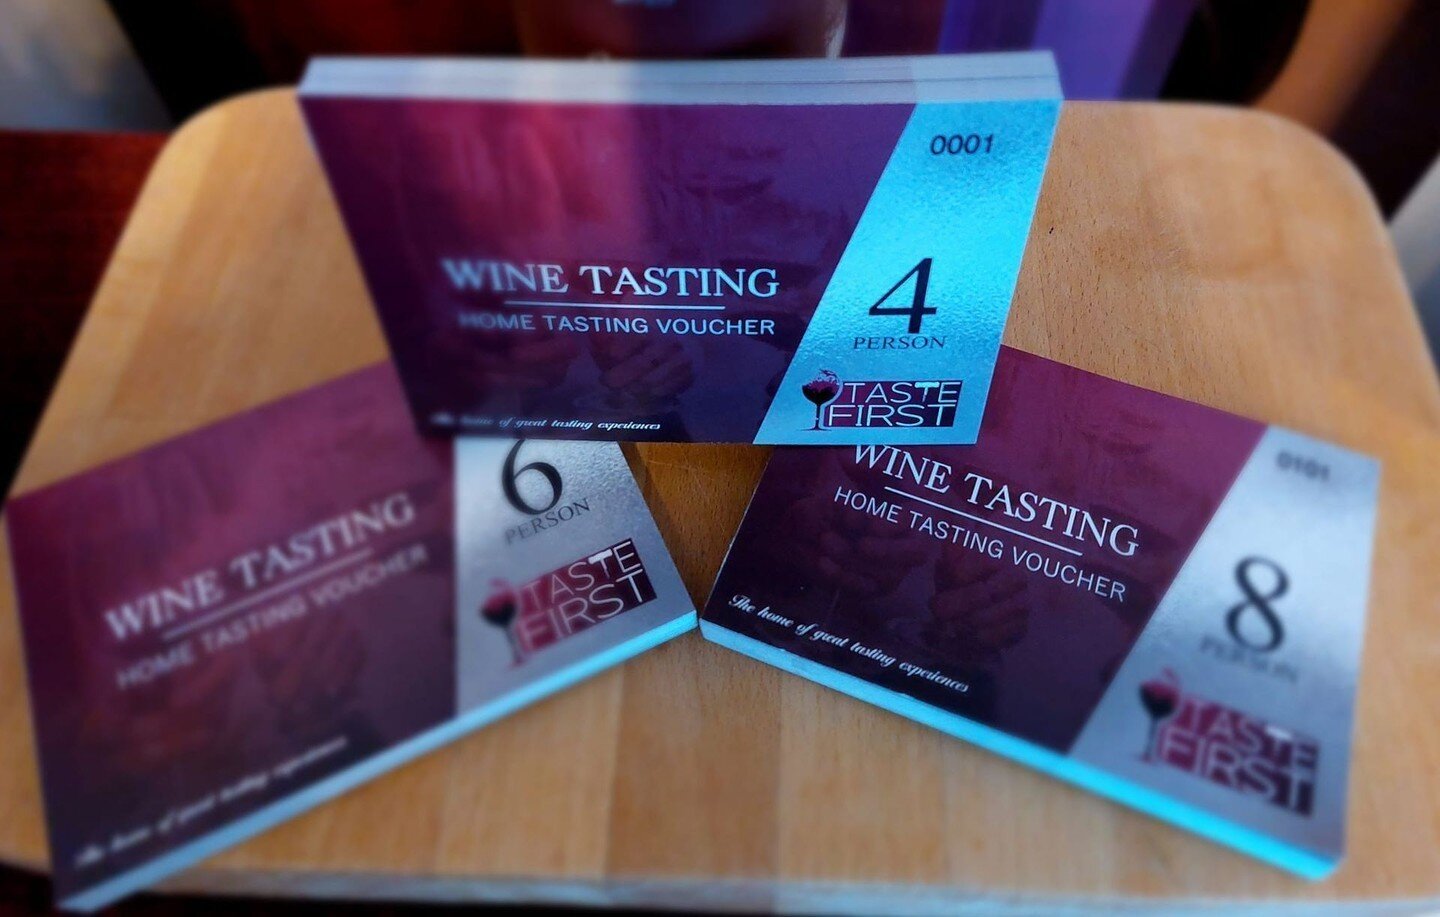 🌟 Gift Vouchers 🌟

Do you know someone who loves wine? 🤔

Rather than just buying the generic bottle of wine, why not gift them a tutored wine tasting experience? 🍷

There are no expiry dates on our vouchers, so you don't need to worry about purc